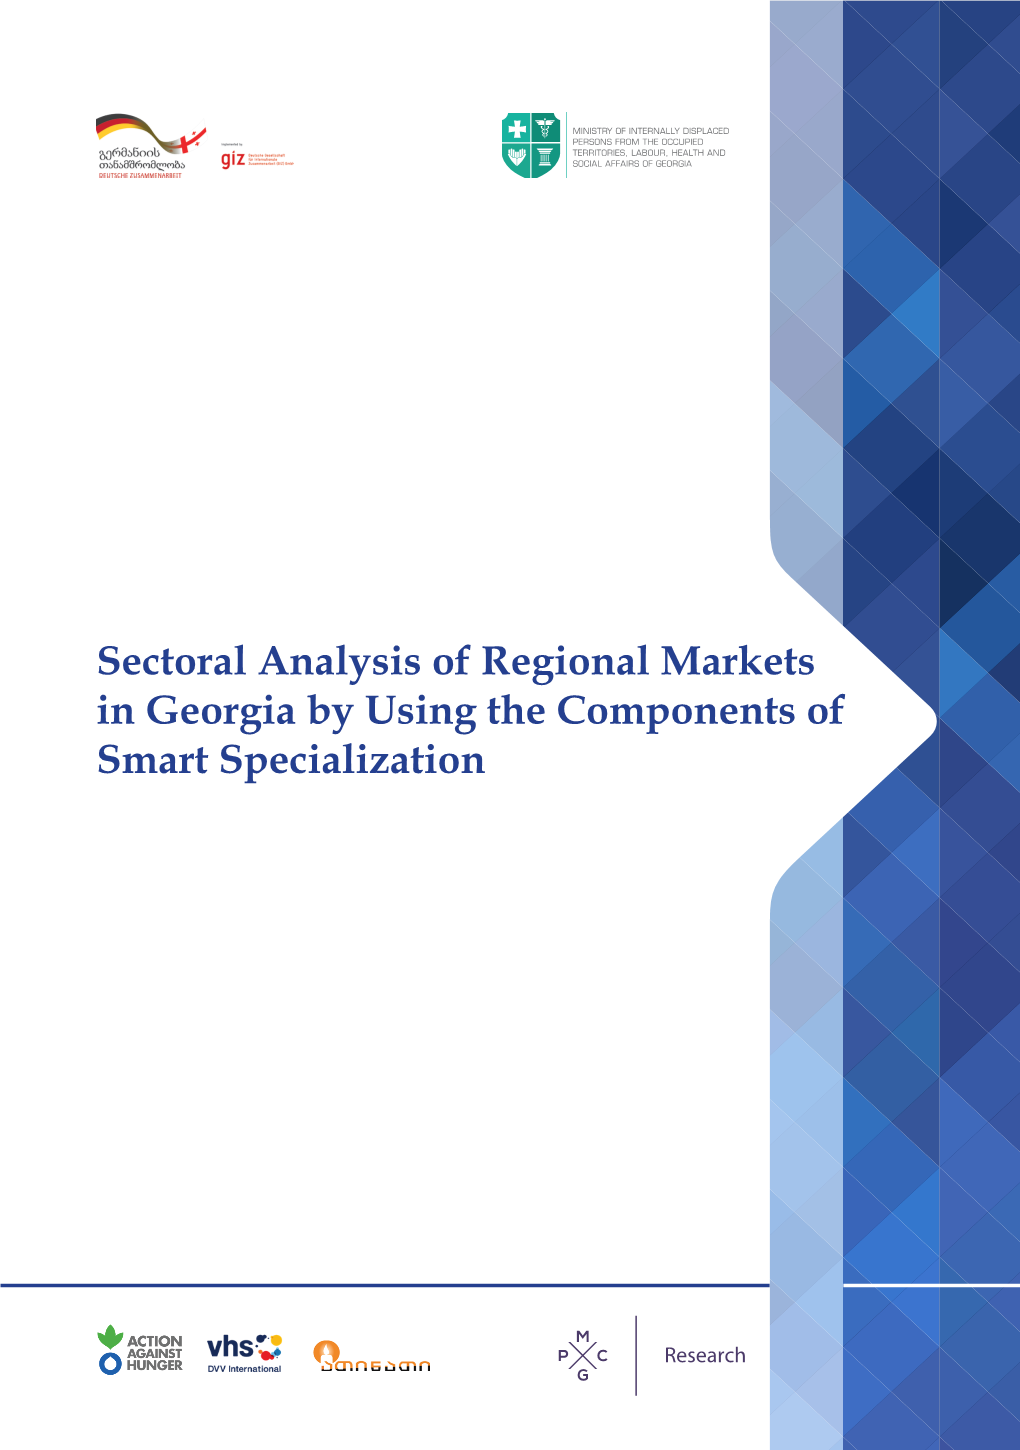 Sectoral Analysis of Regional Markets in Georgia by Using the Components of Smart Specialization